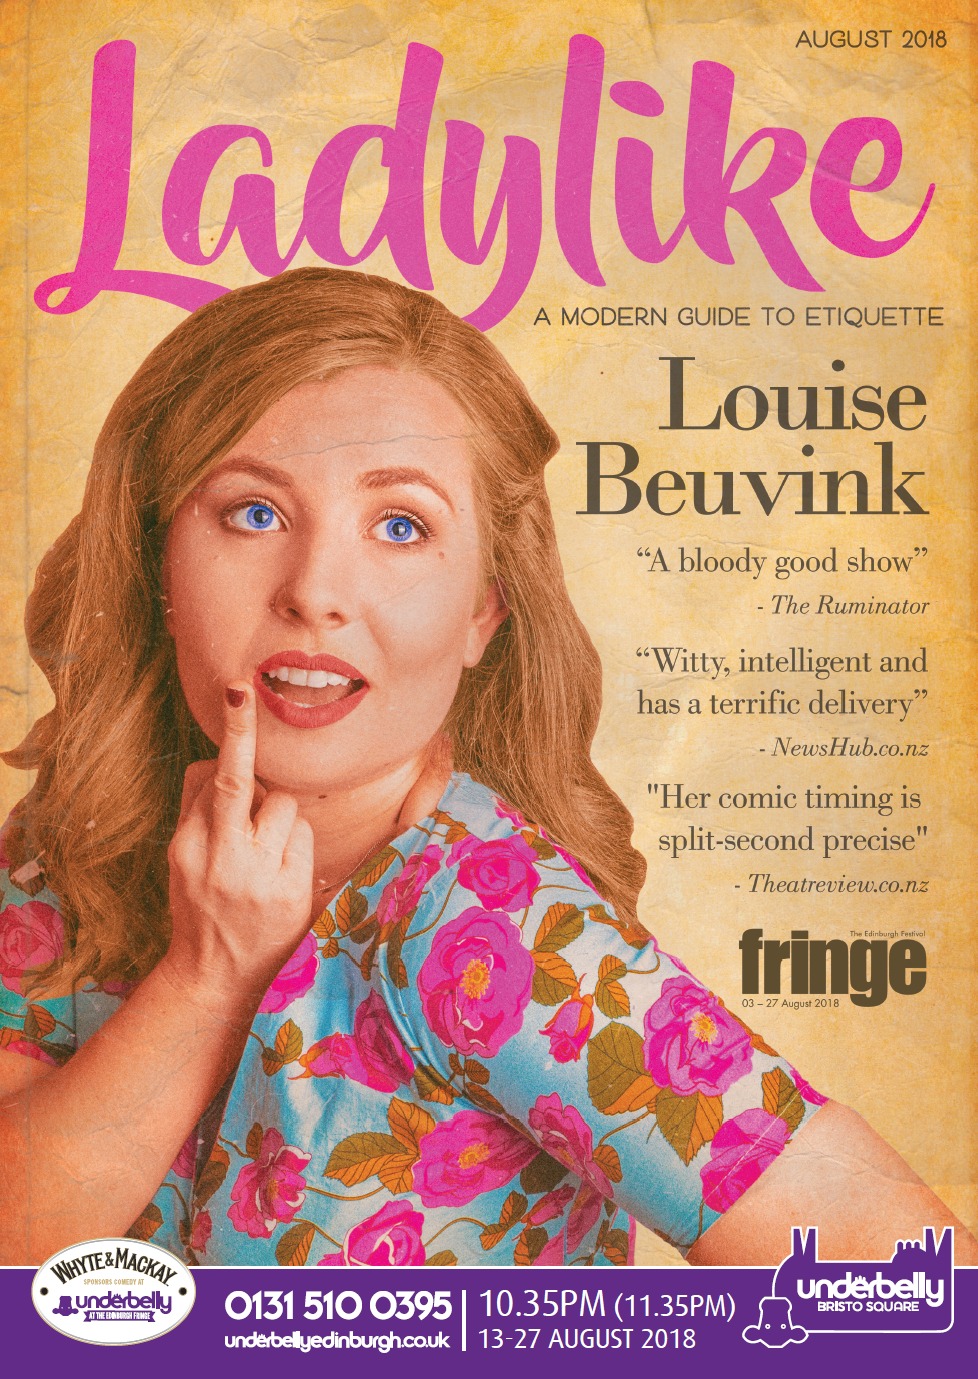 The poster for Ladylike: A Modern Guide to Etiquette